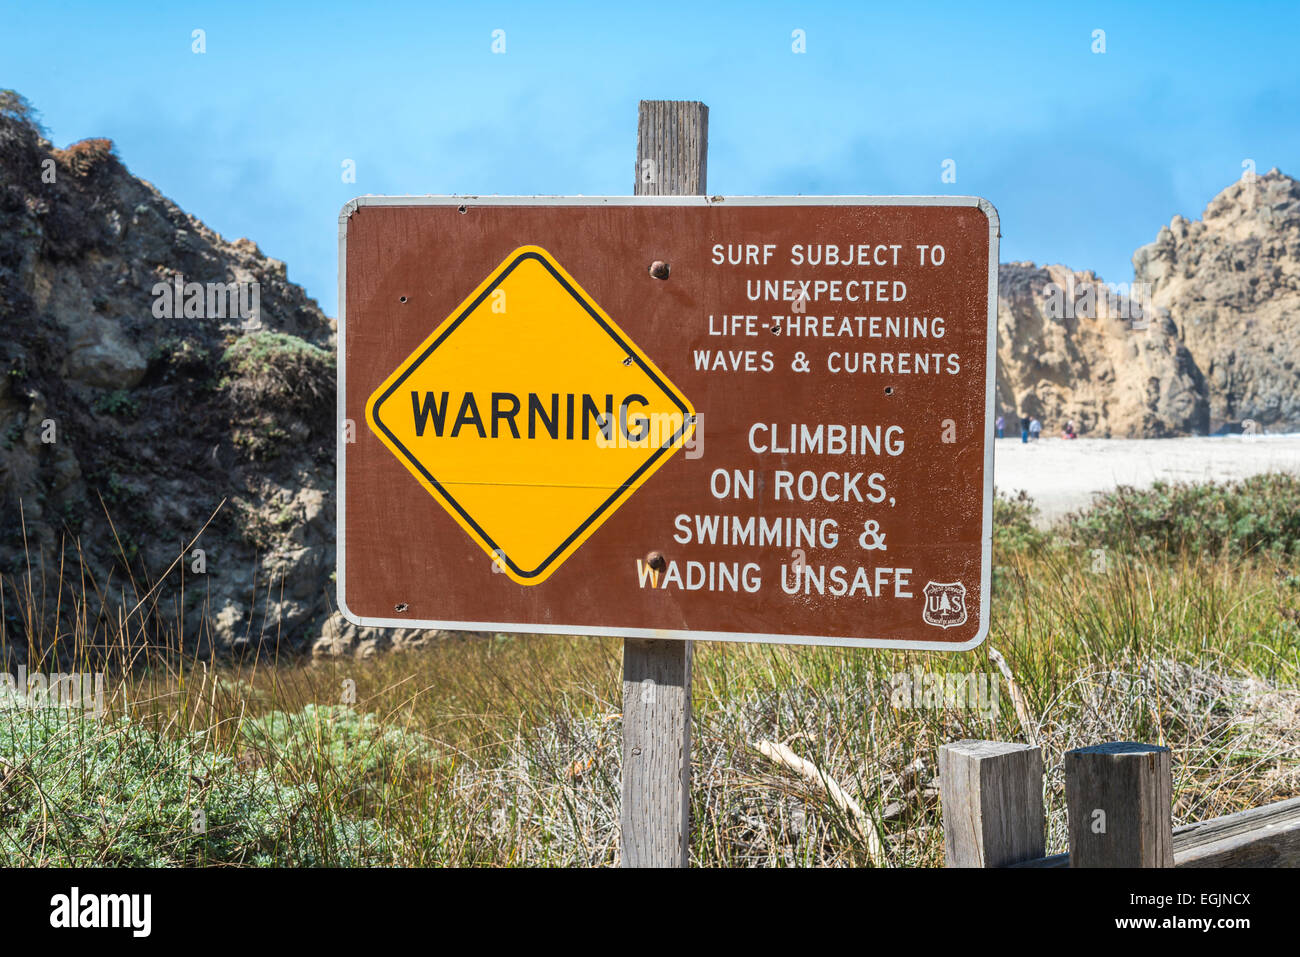 Warning sign seen as entering Pfeiffer Beach. Pfeiffer Big Sur State Park, California, United States. Stock Photo